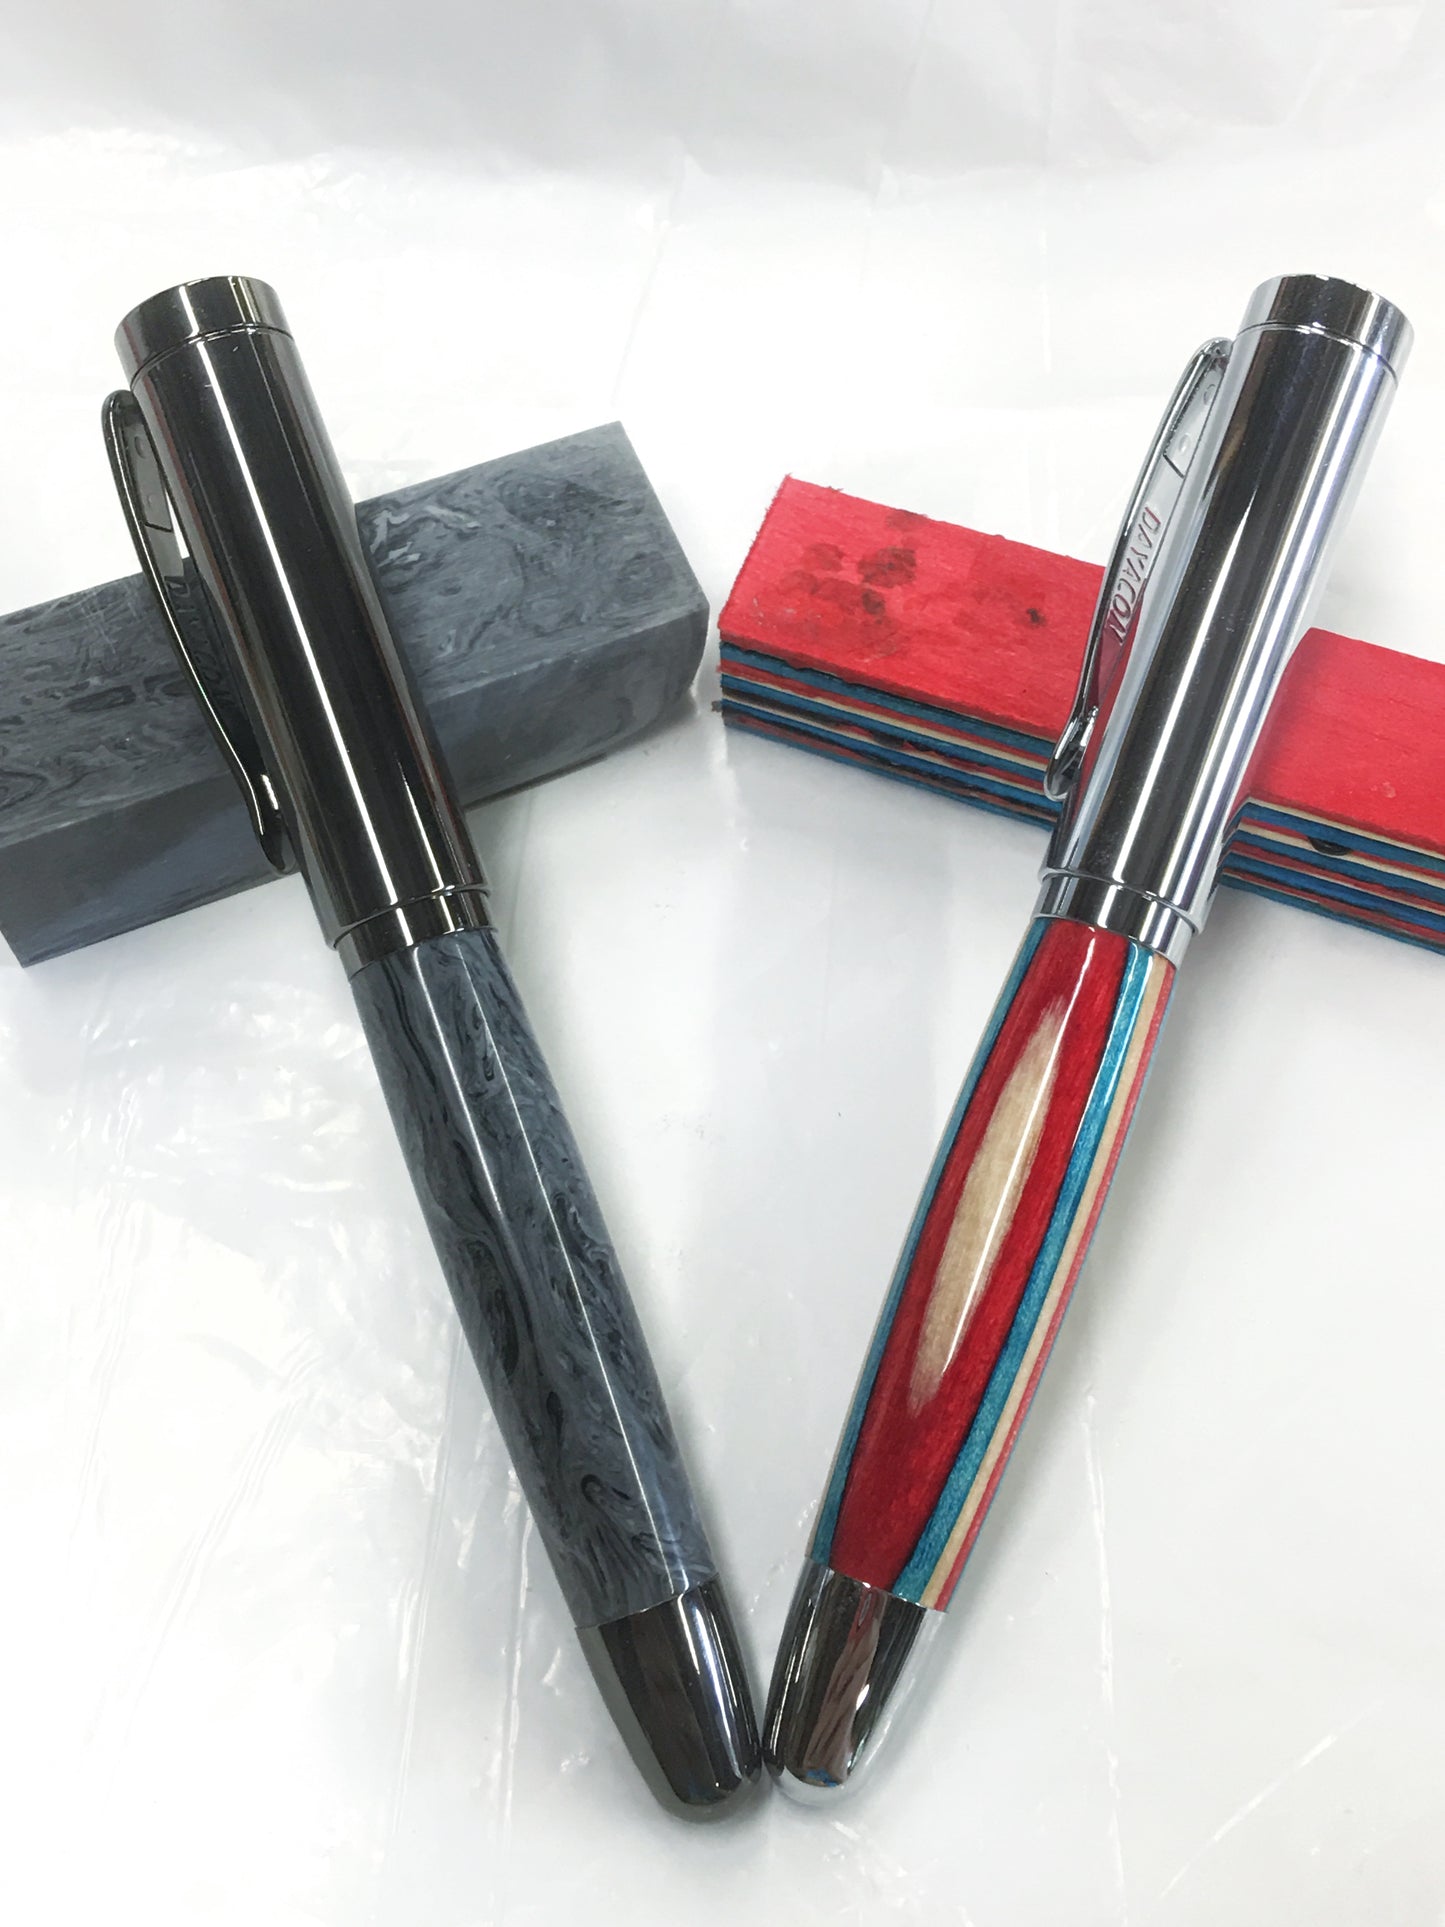 Dennis Rollerball / Chrome - Wood / Red,White and blue colored craft sticks